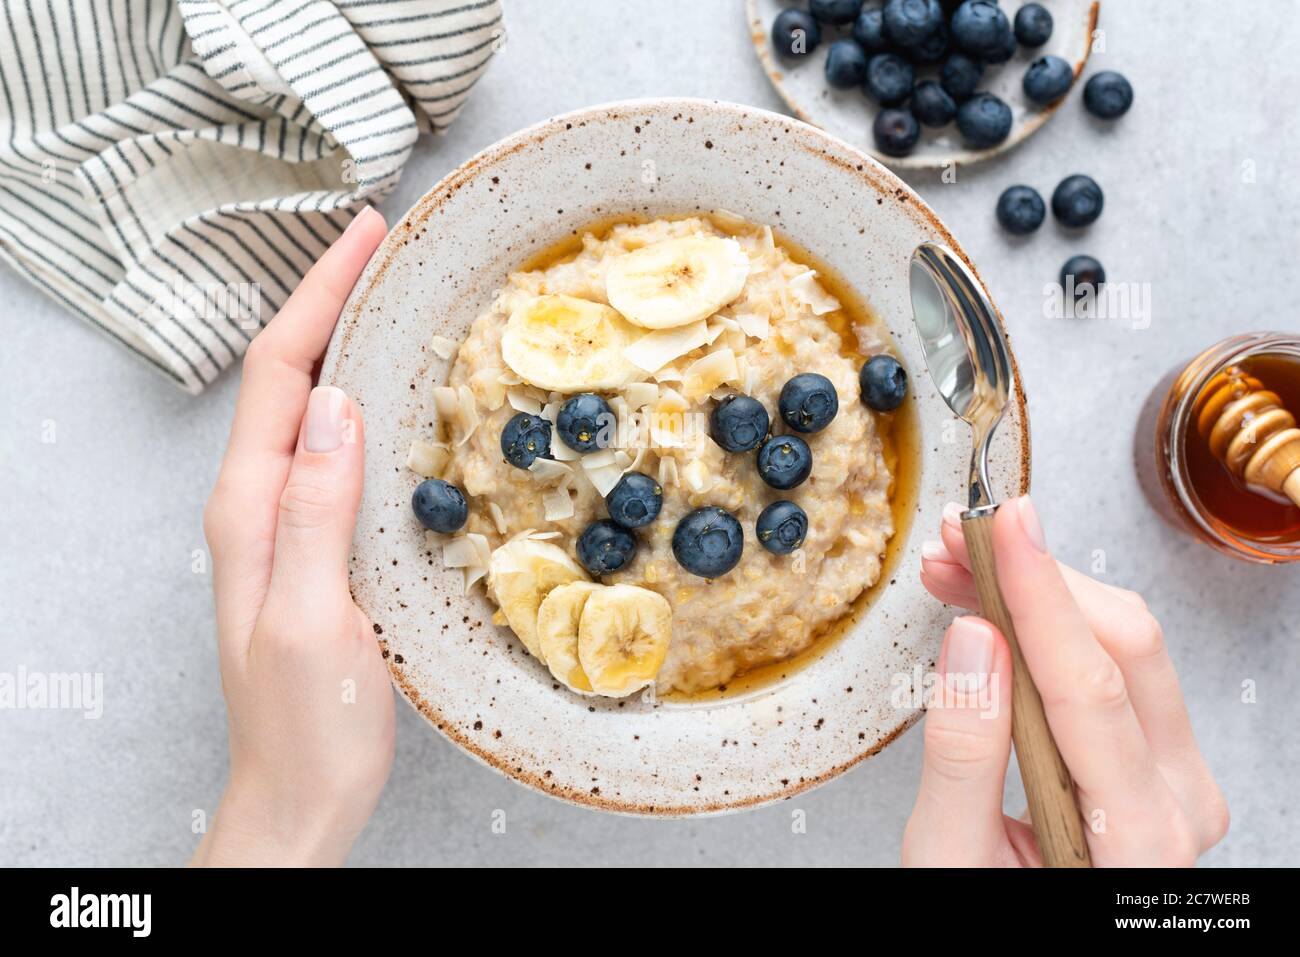 Oatmeal porridge with banana, blueberries and honey. Female hands holding bowl of oatmeal porridge over grey concrete background, table top view Stock Photo